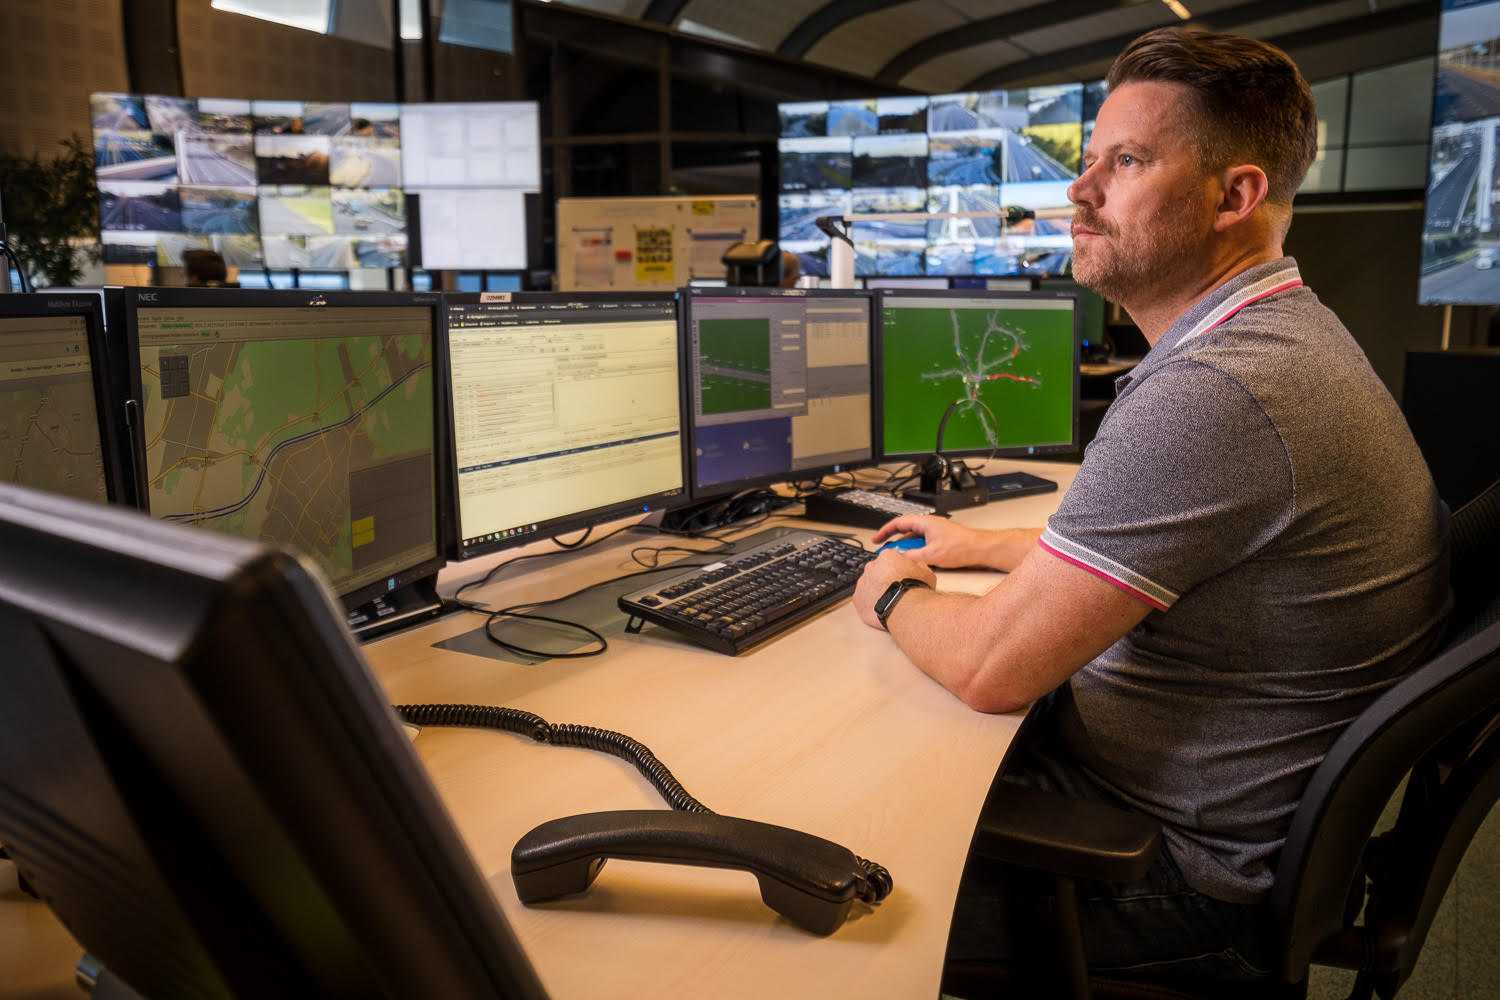 Wout Buikema of the Central Netherlands Traffic Control Centre